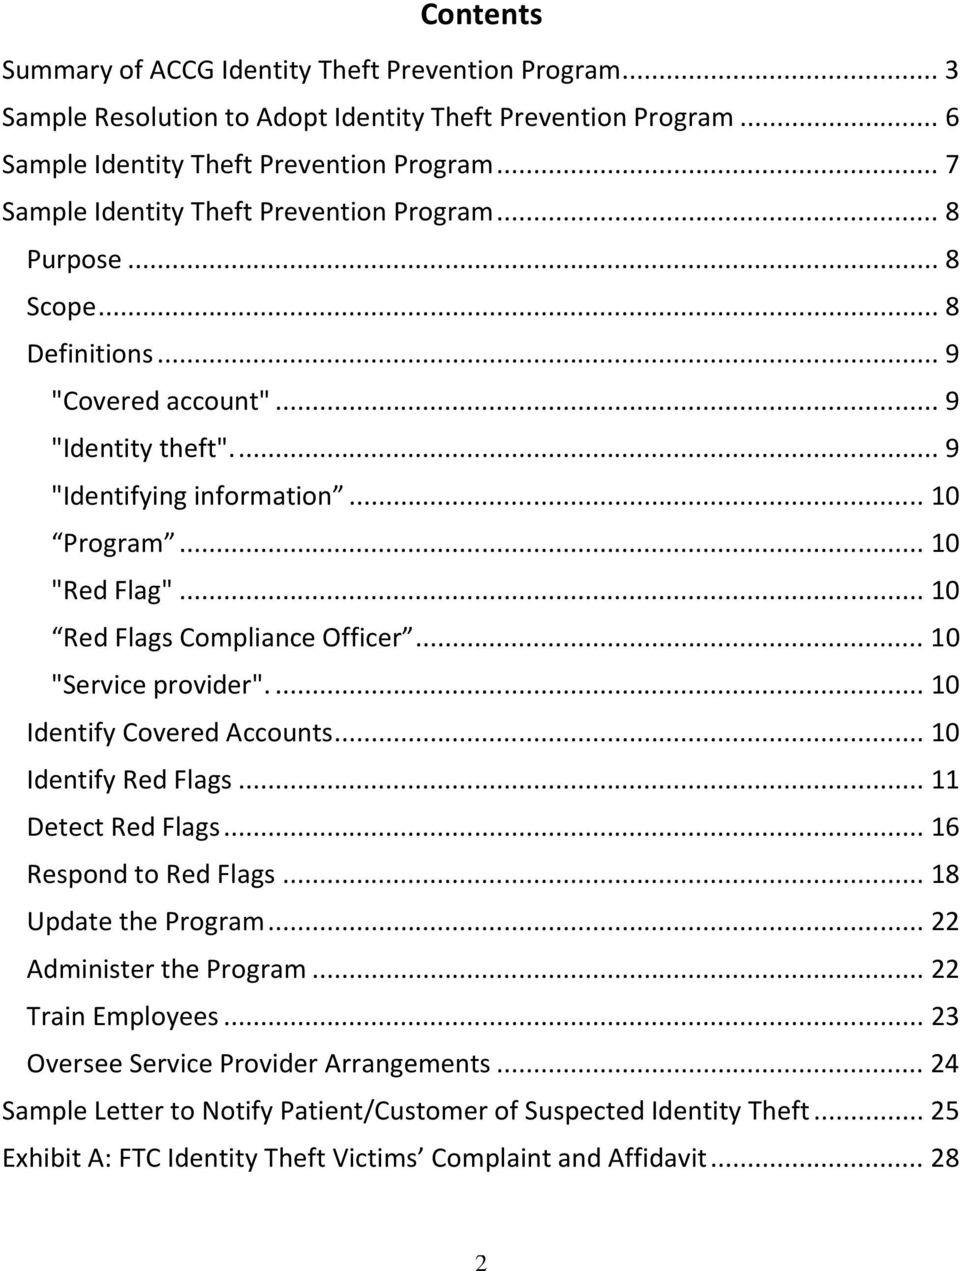 .. 10 Red Flags Compliance Officer... 10 "Service provider".... 10 Identify Covered Accounts... 10 Identify Red Flags... 11 Detect Red Flags... 16 Respond to Red Flags... 18 Update the Program.